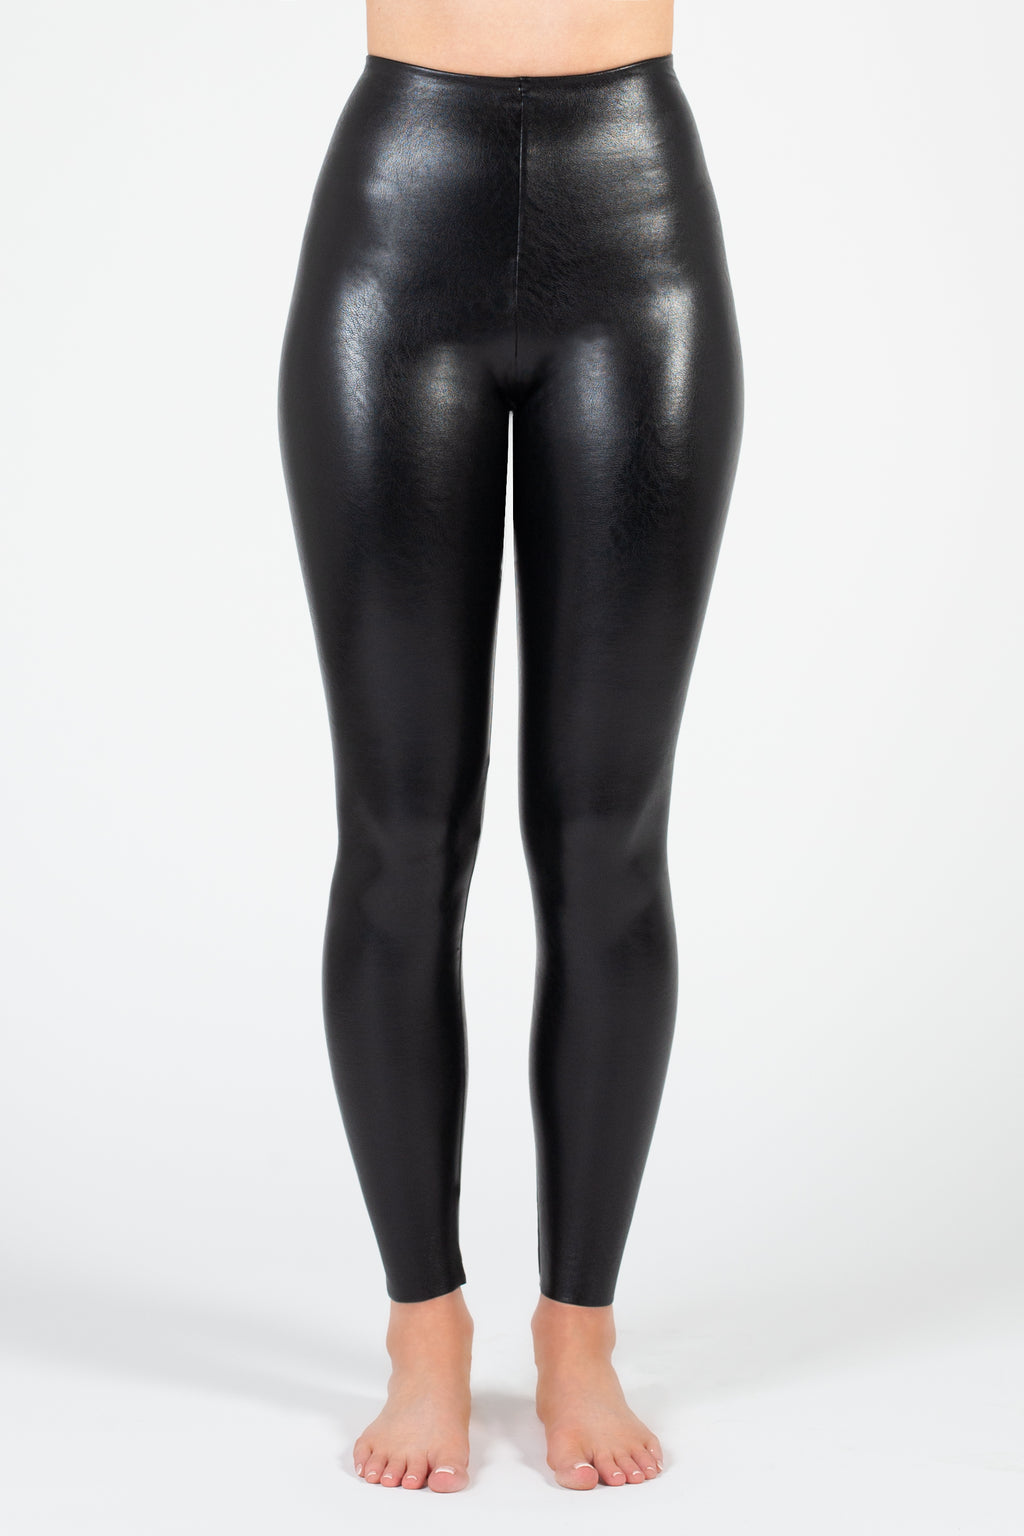 Commando Perfect Control Faux Leather Legging Snake SLG50 - Free Shipping  at Largo Drive